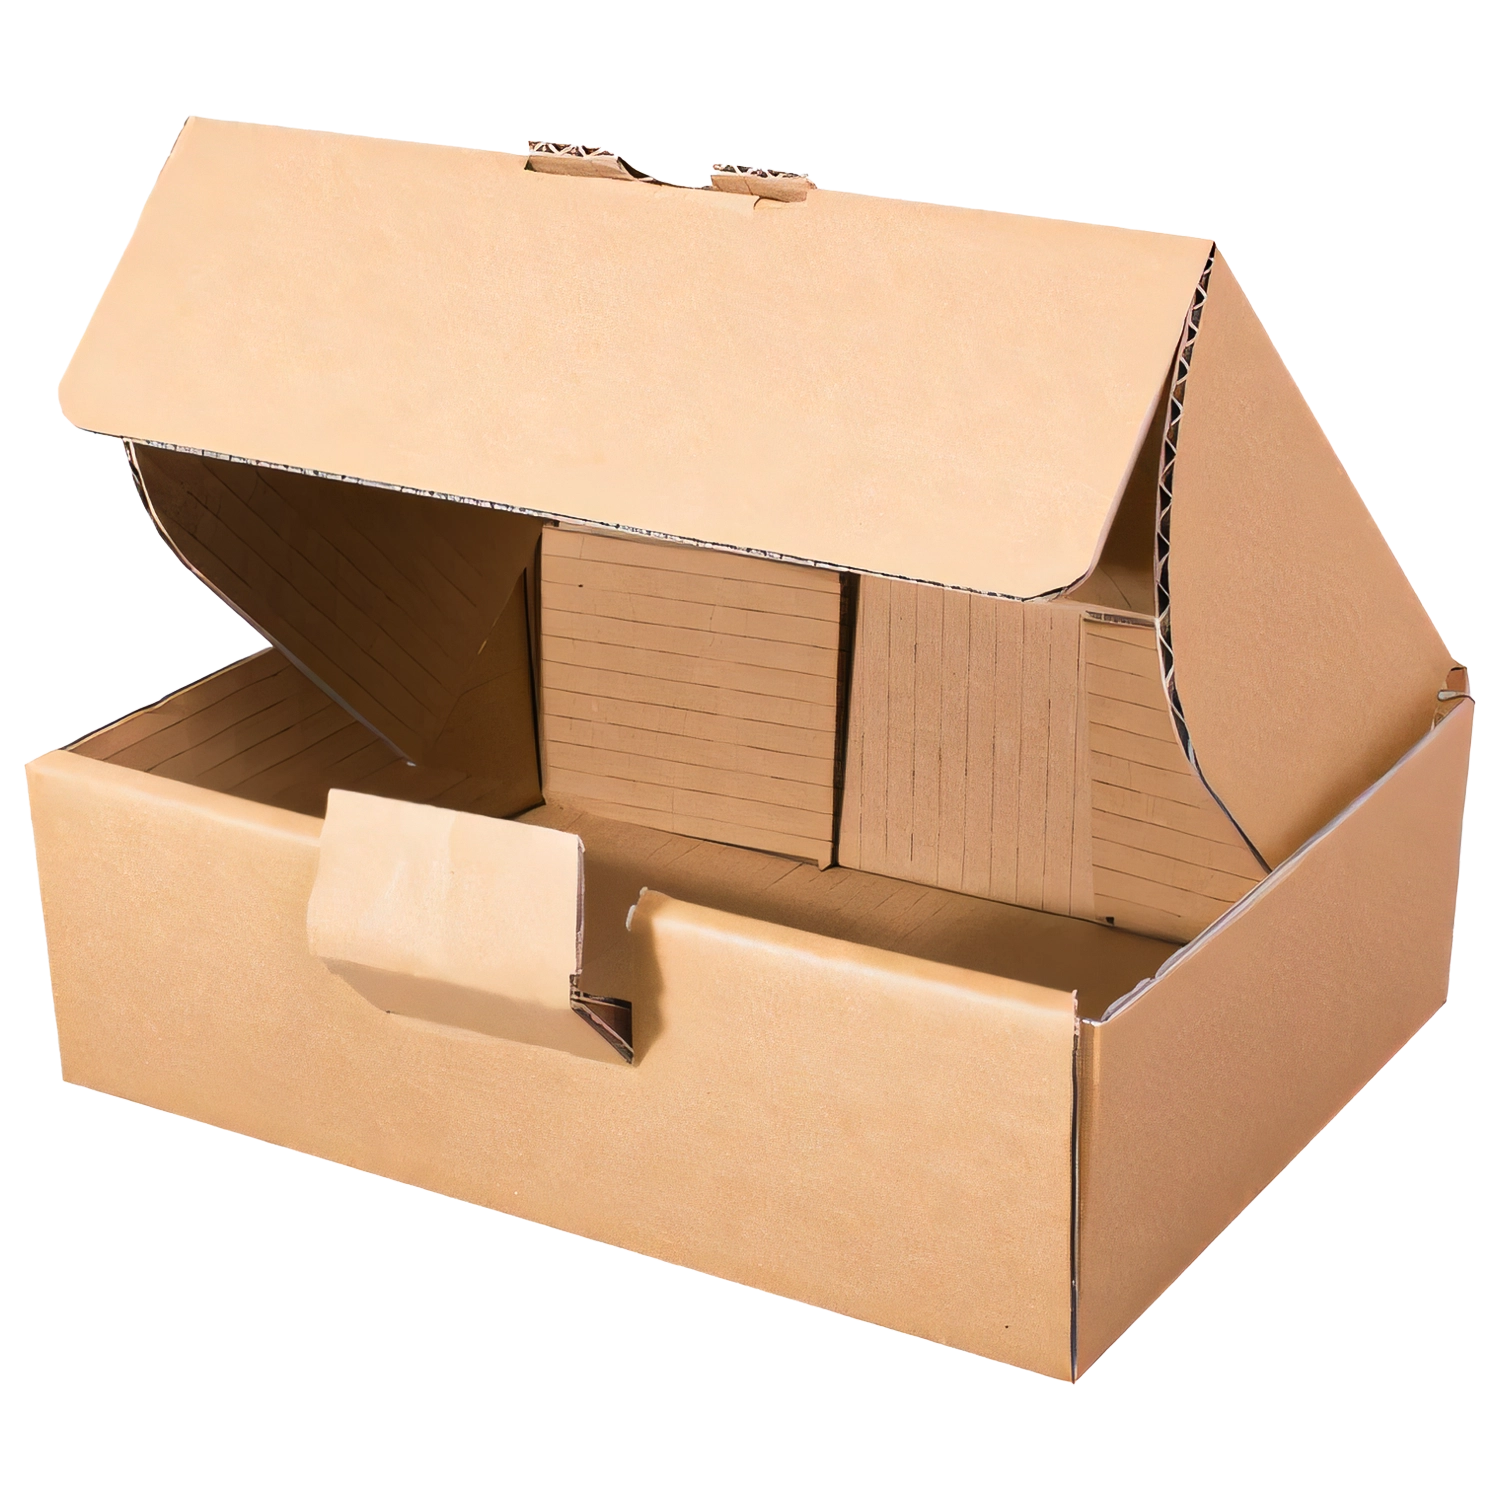 Midi Small Royal Mail Boxes - Shipping Boxes 13.1x7.9x2.6 Inch Open